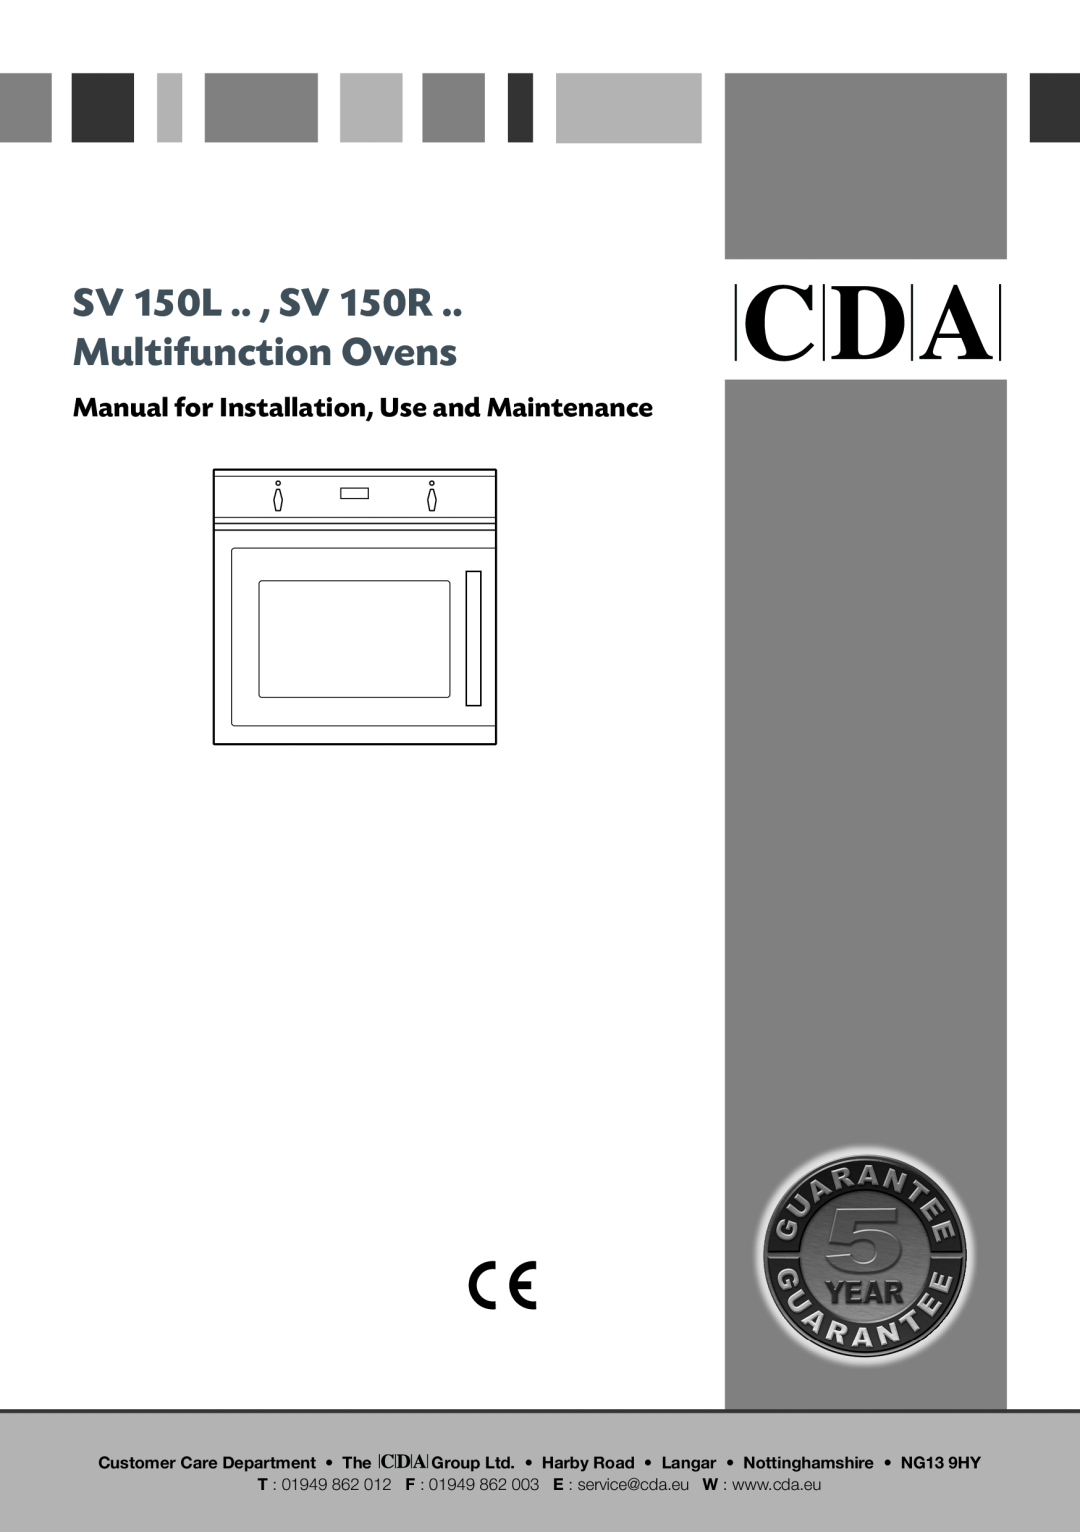 CDA manual SV 150L .. , SV 150R Multifunction Ovens, Manual for Installation, Use and Maintenance, T 